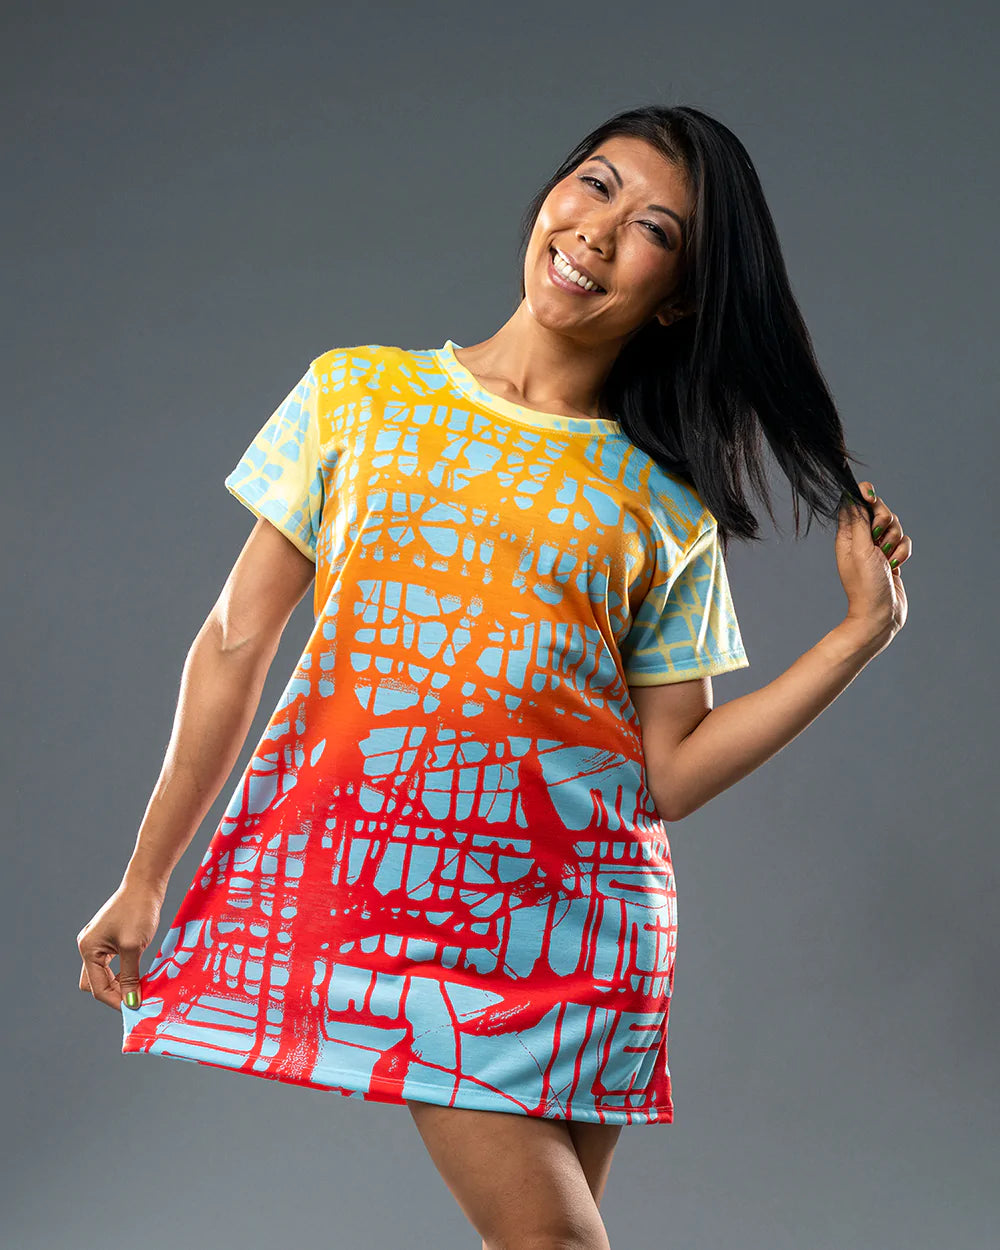  
Inspired by Jumper Maybach’s original, iconic artwork "Sunset Matrix”

6oz Jersey Knit - Poly Fabric
All over print
Custom cut and sewn
Ribbed crewneck
Lower rear Sunrise Matrix, the T-Shirt Dress by Jumper Maybach®DressesMWWJumper Maybach